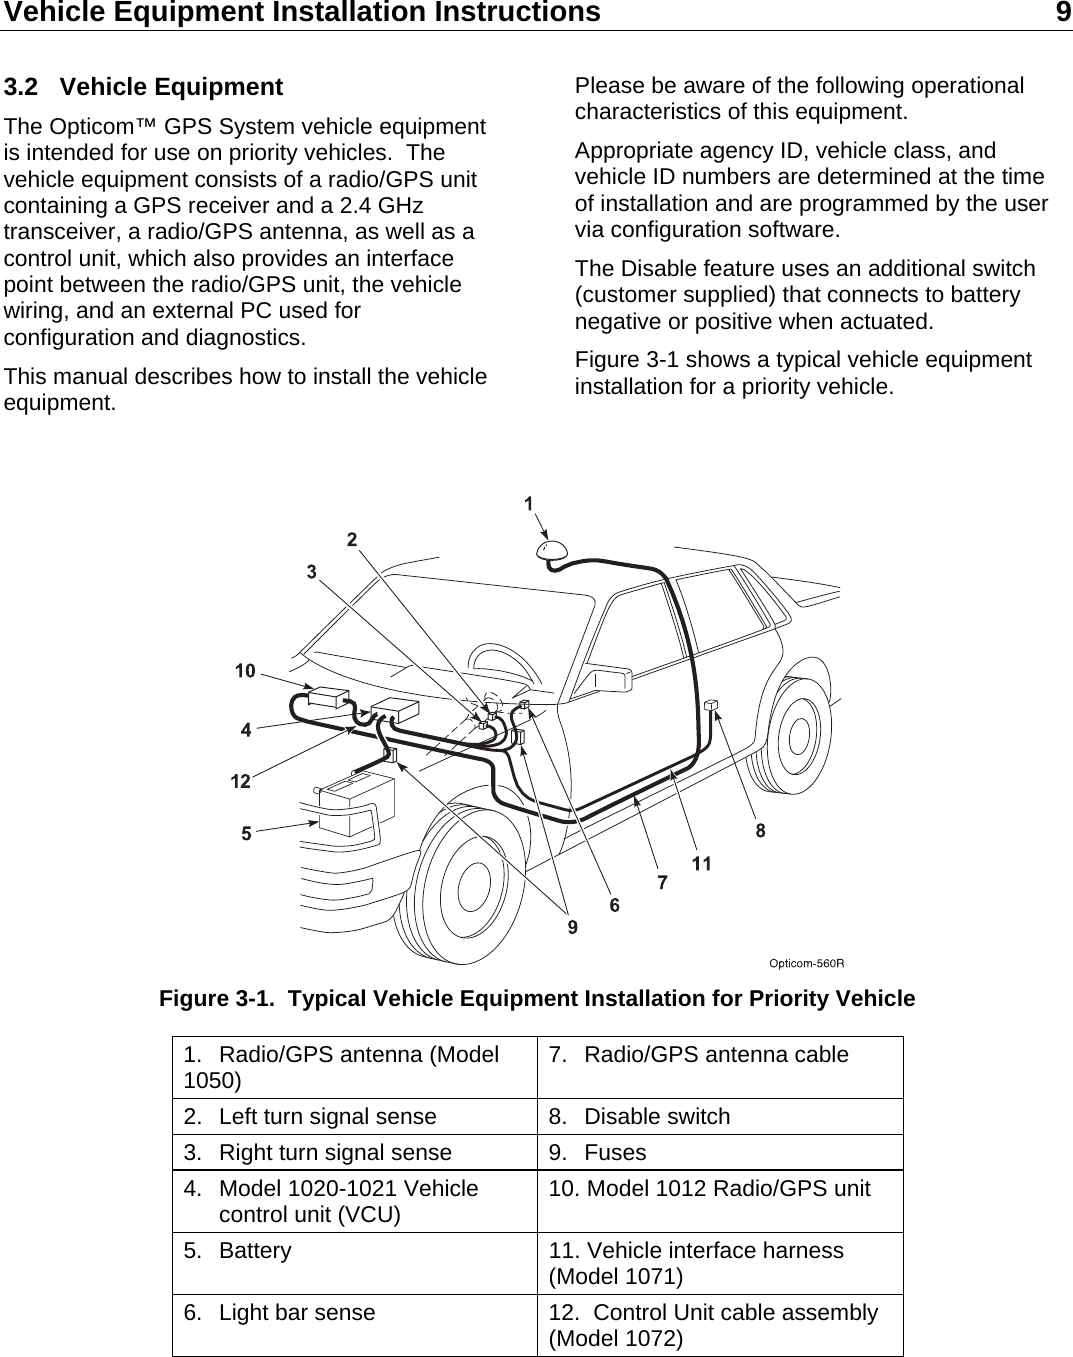 Vehicle Equipment Installation Instructions 9  3.2 Vehicle Equipment The Opticom™ GPS System vehicle equipment is intended for use on priority vehicles.  The vehicle equipment consists of a radio/GPS unit containing a GPS receiver and a 2.4 GHz transceiver, a radio/GPS antenna, as well as a control unit, which also provides an interface point between the radio/GPS unit, the vehicle wiring, and an external PC used for configuration and diagnostics. This manual describes how to install the vehicle equipment. Please be aware of the following operational characteristics of this equipment. Appropriate agency ID, vehicle class, and vehicle ID numbers are determined at the time of installation and are programmed by the user via configuration software. The Disable feature uses an additional switch (customer supplied) that connects to battery negative or positive when actuated. Figure 3-1 shows a typical vehicle equipment installation for a priority vehicle.    Figure 3-1.  Typical Vehicle Equipment Installation for Priority Vehicle 1. Radio/GPS antenna (Model 1050)  7. Radio/GPS antenna cable 2.  Left turn signal sense  8.  Disable switch 3.  Right turn signal sense  9.  Fuses 4.  Model 1020-1021 Vehicle   control unit (VCU)  10. Model 1012 Radio/GPS unit 5.  Battery  11. Vehicle interface harness (Model 1071) 6.  Light bar sense  12.  Control Unit cable assembly (Model 1072)   